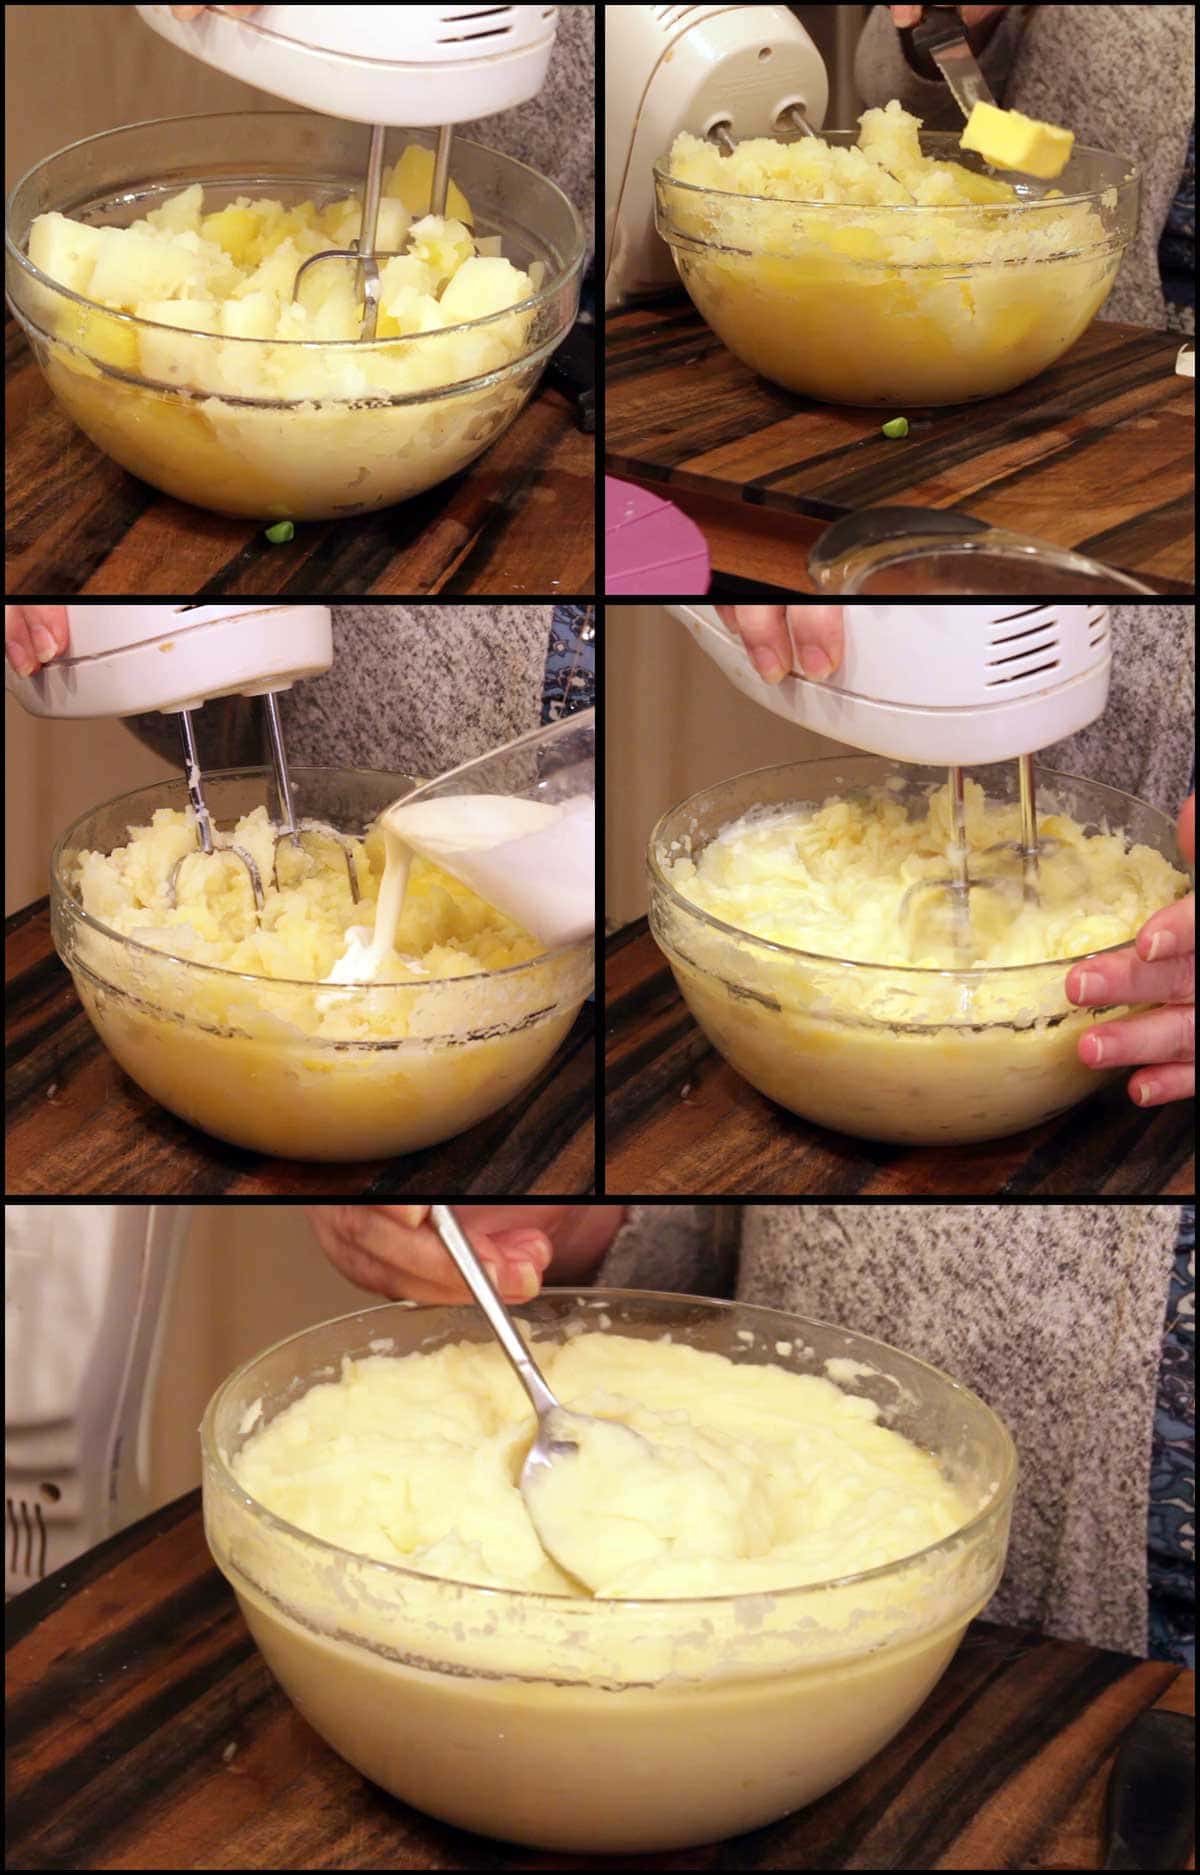 graphic showing steps for making mashed potatoes